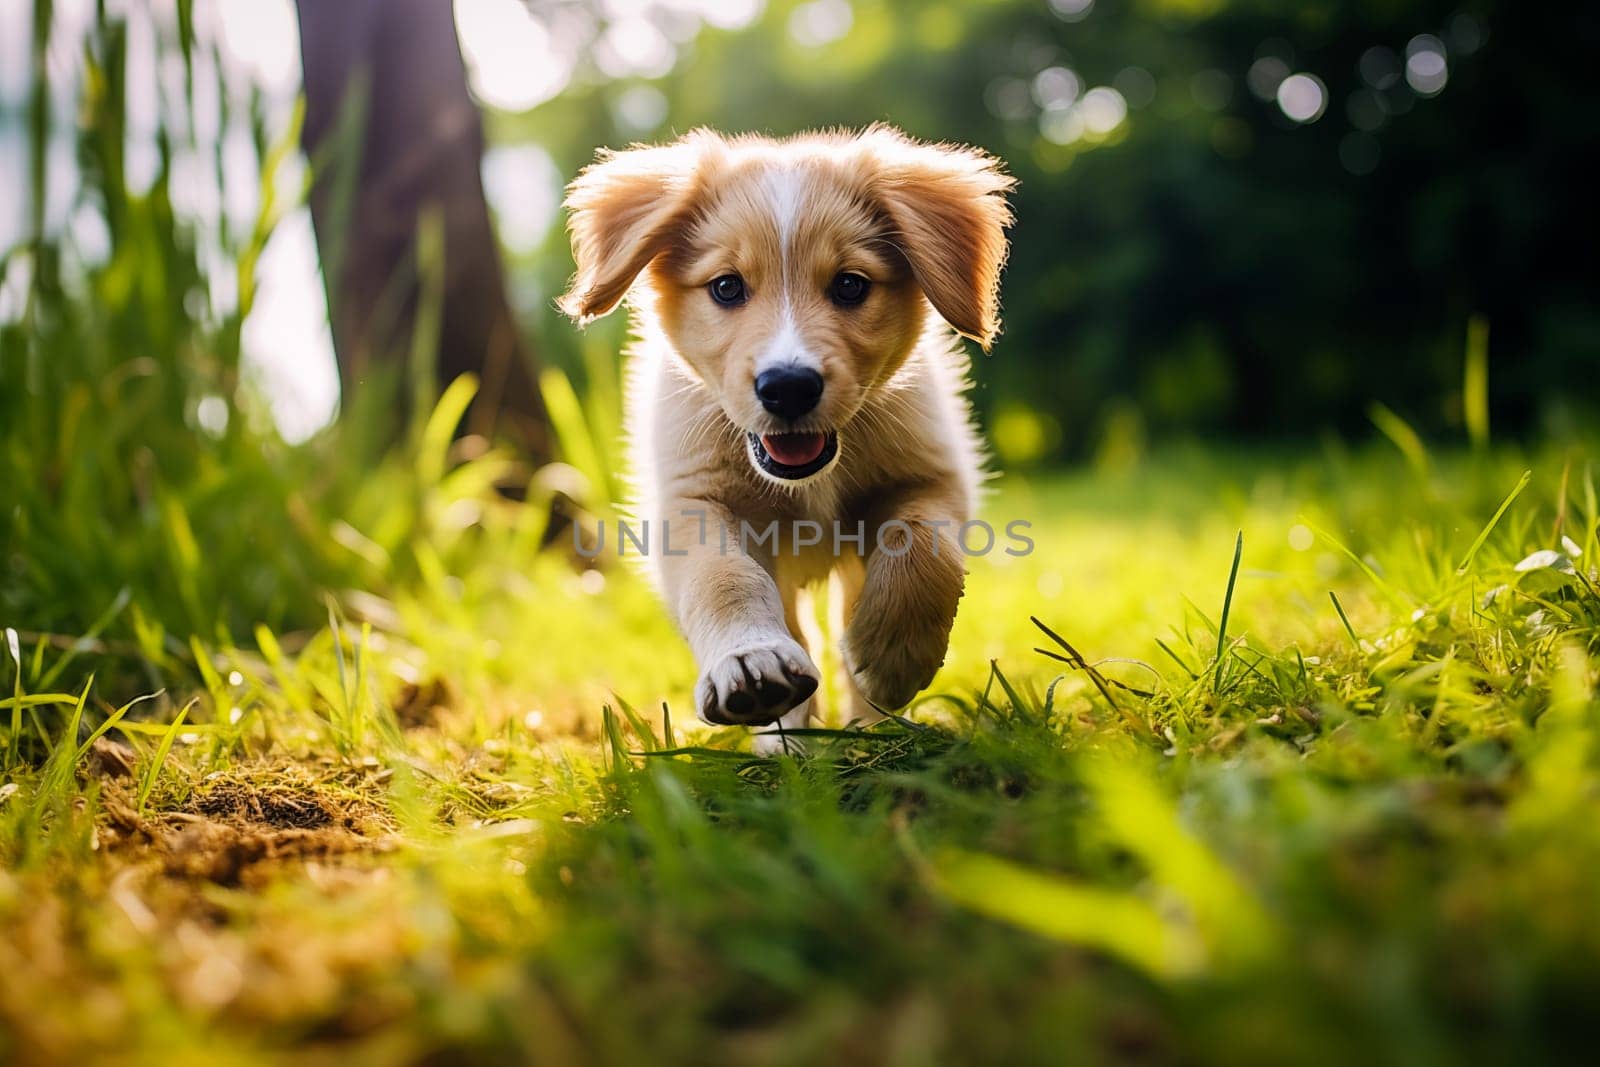 Playful Puppy Running in the Park on Sunny Day by dimol